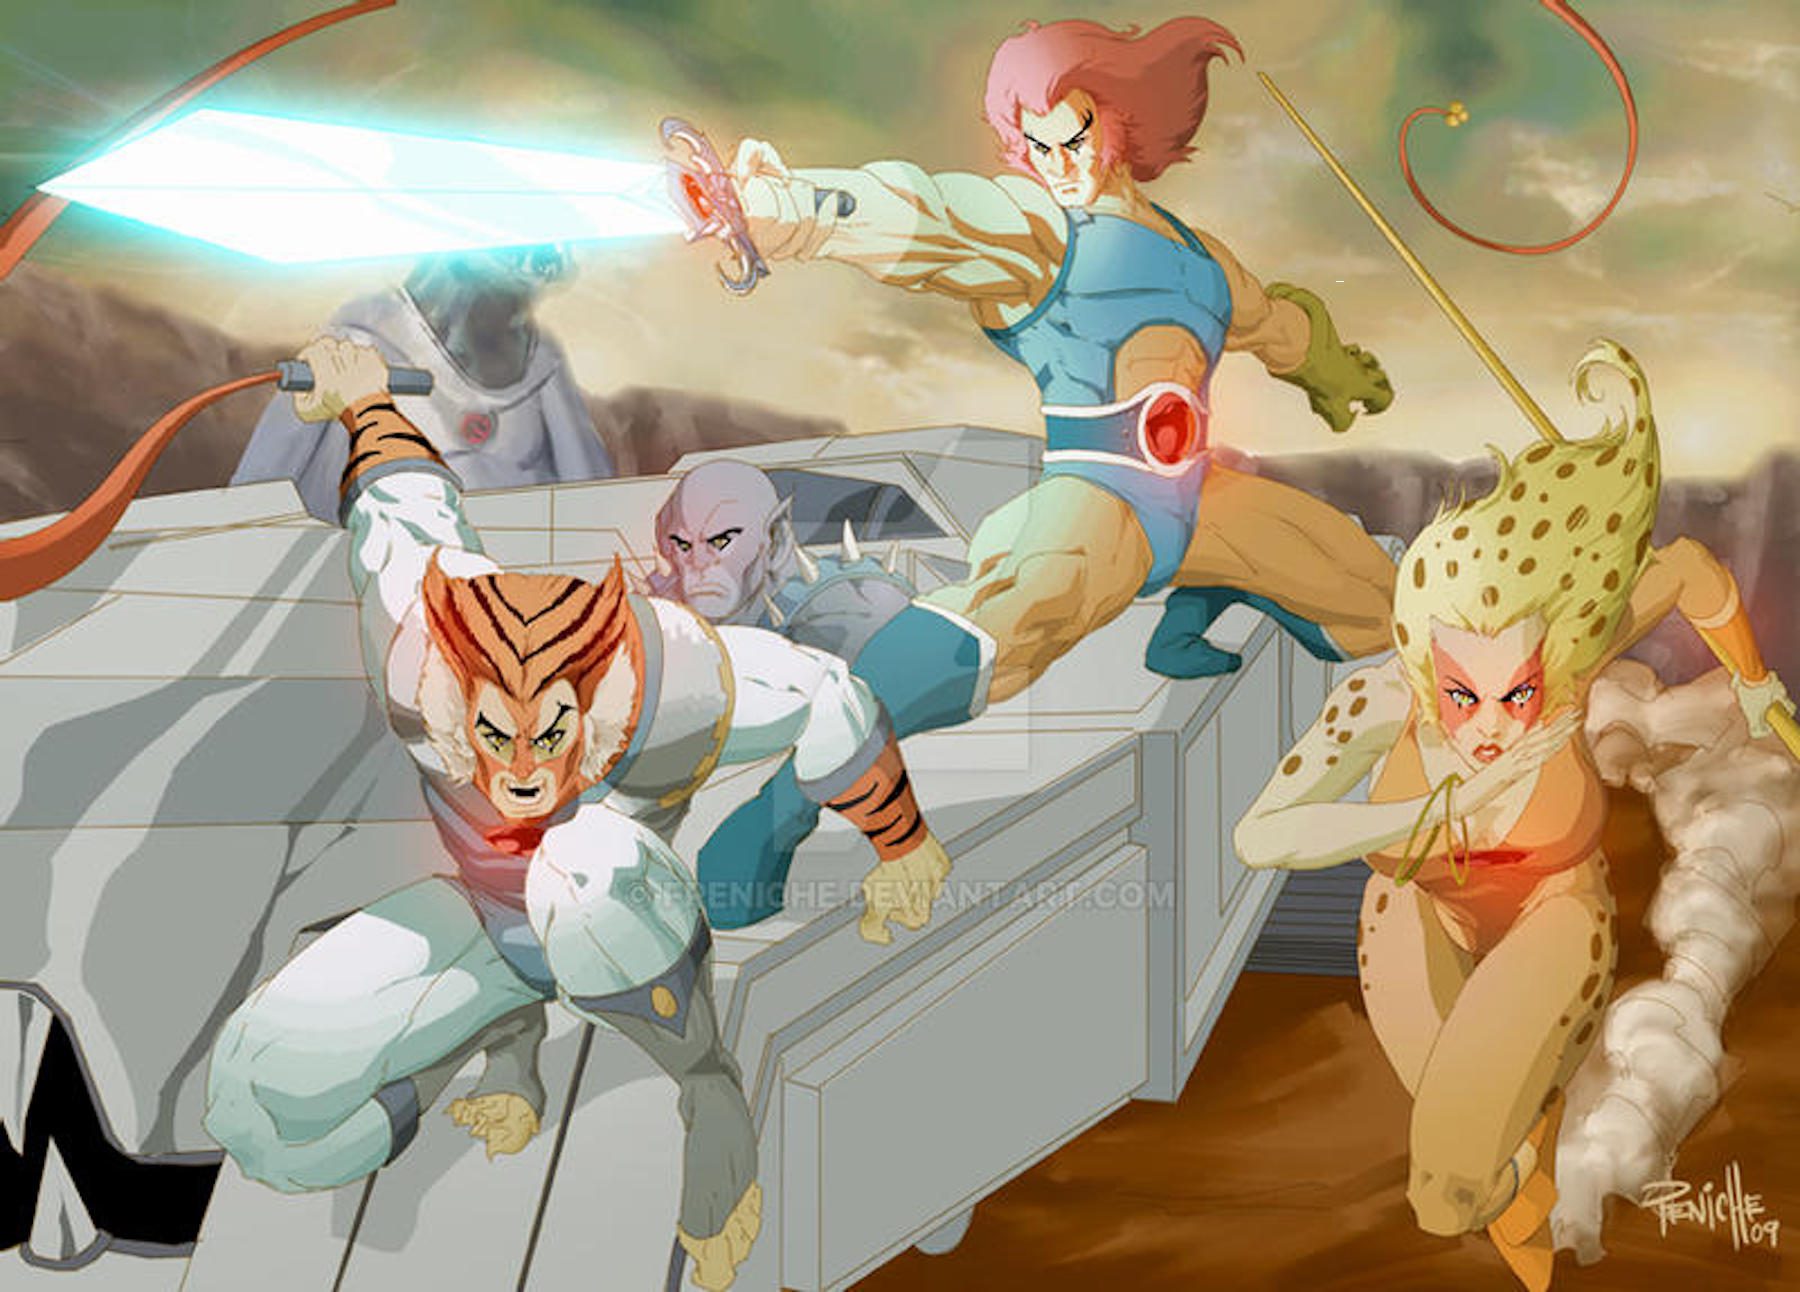 Characters from Thundercats, posed and ready to fight, on a rocky planet.